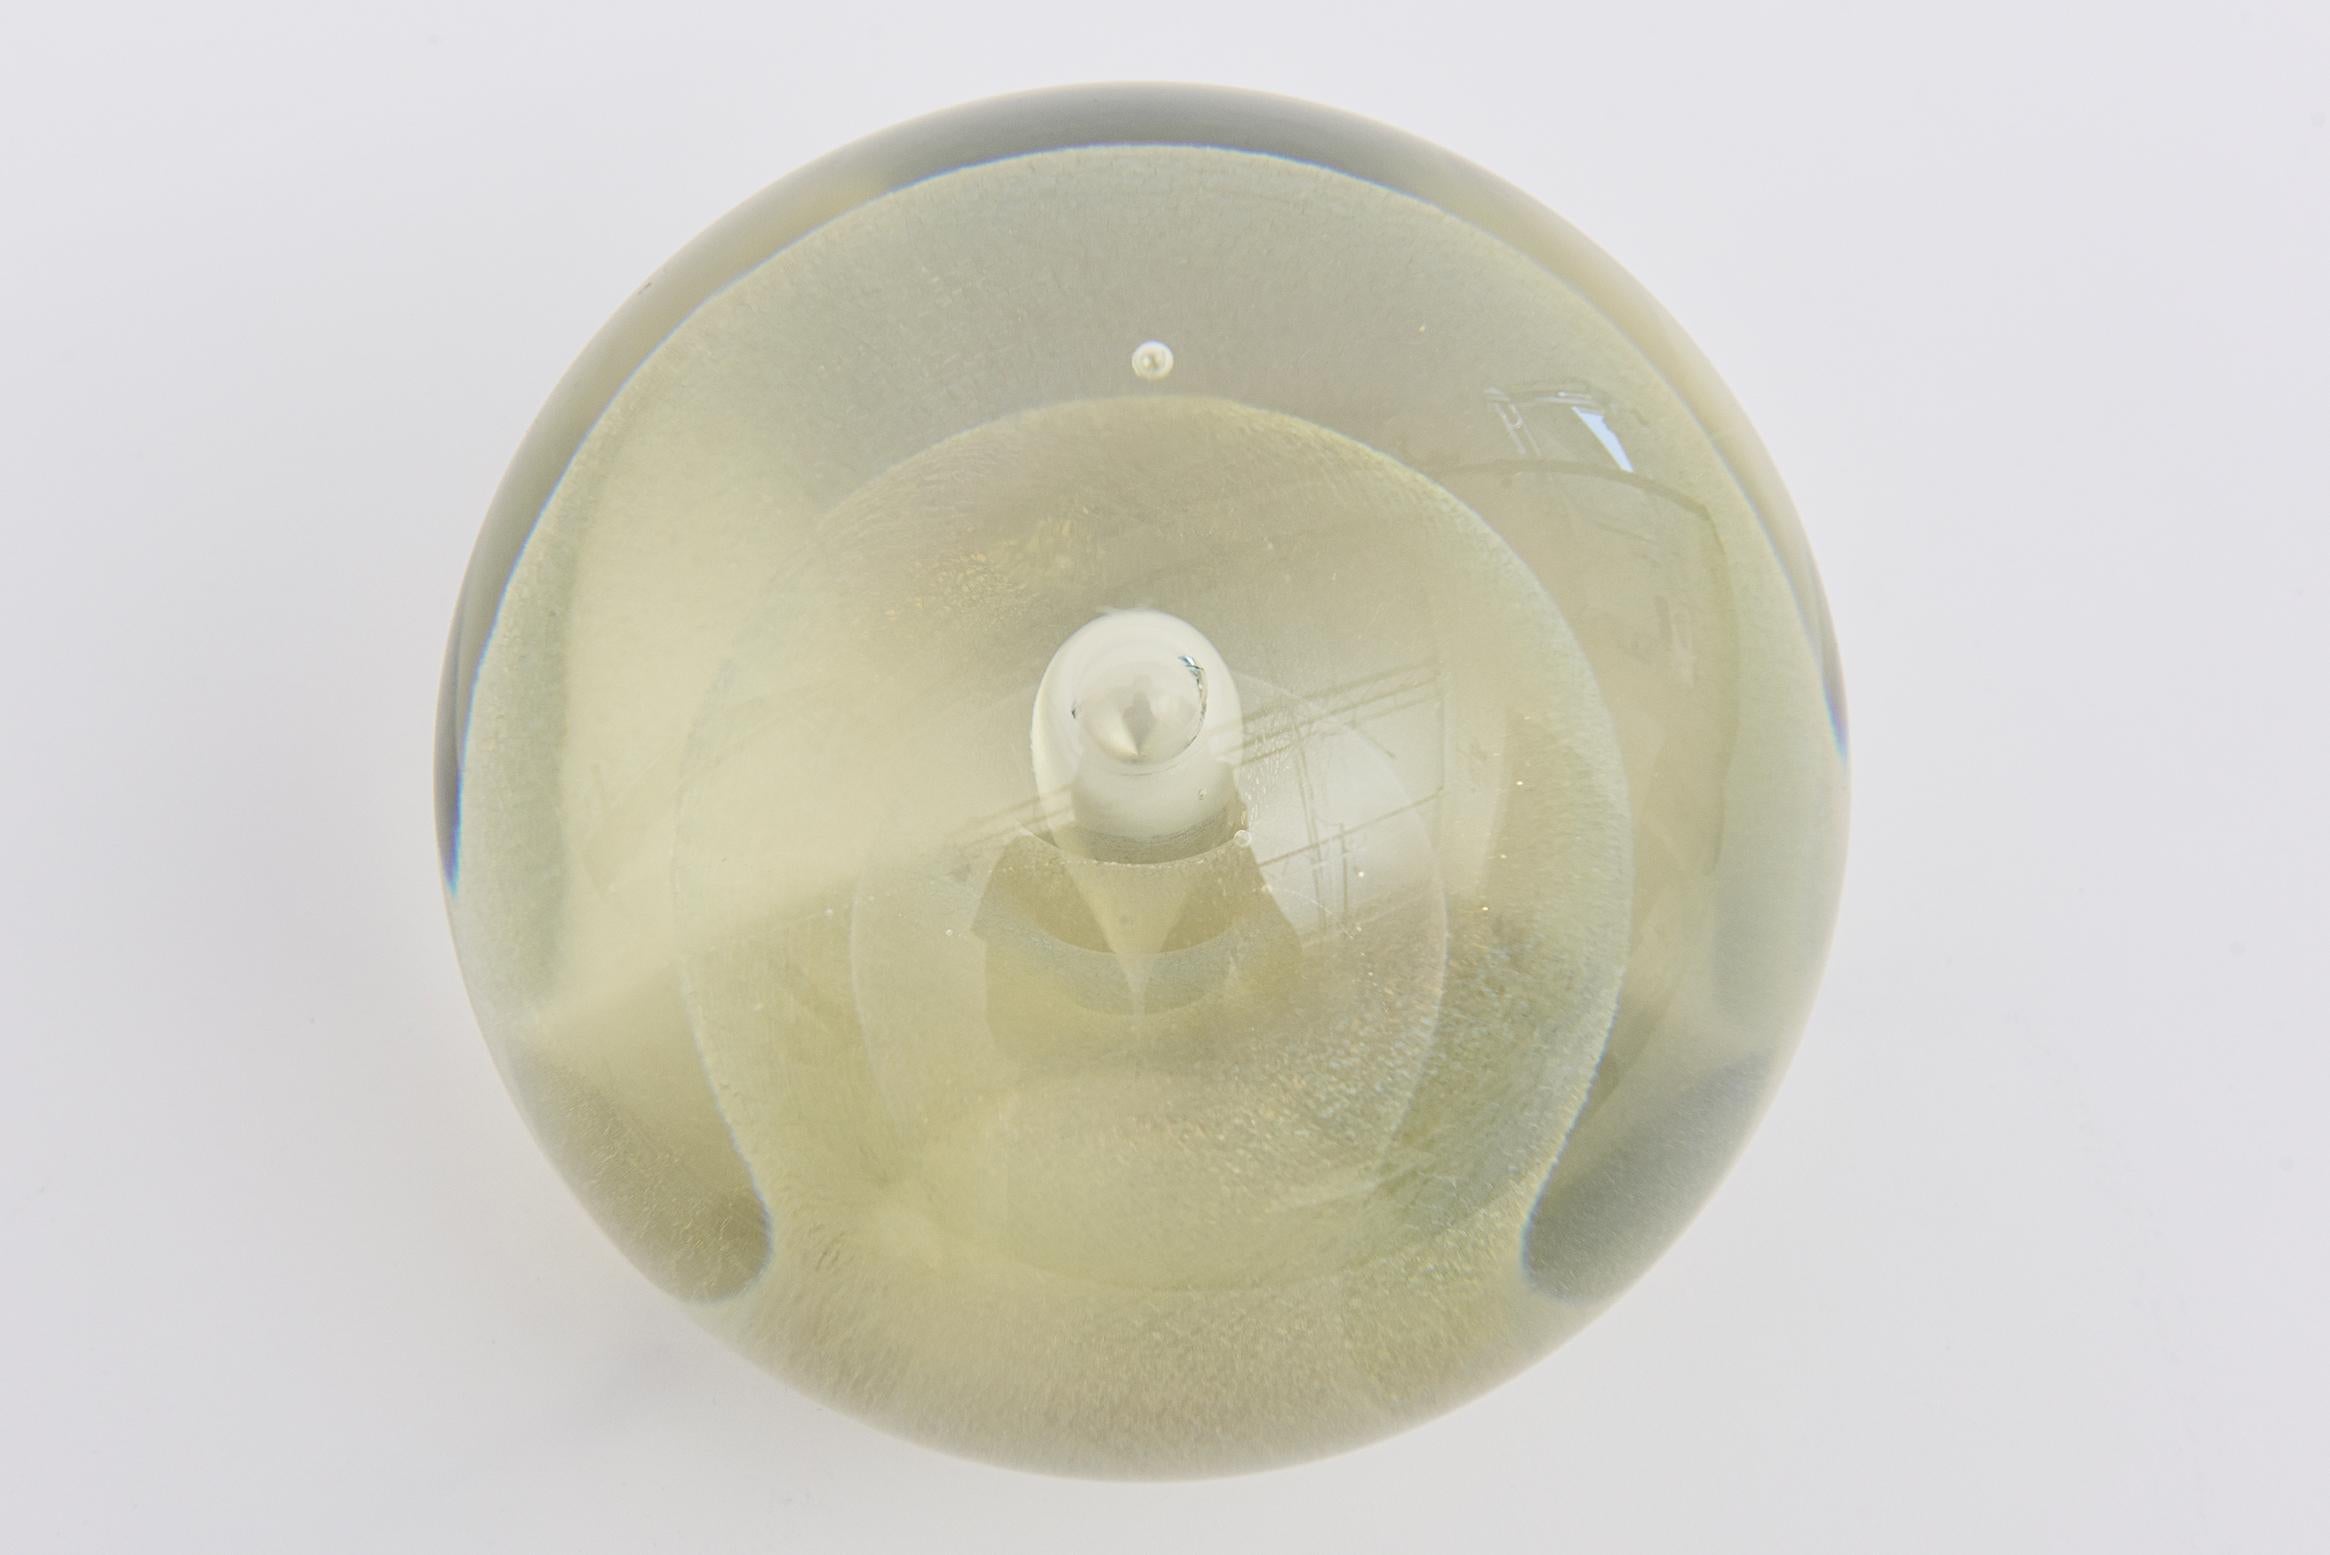 American Vintage Signed Art Glass Sphere Iridescent Submerged Round Ball Sculpture For Sale